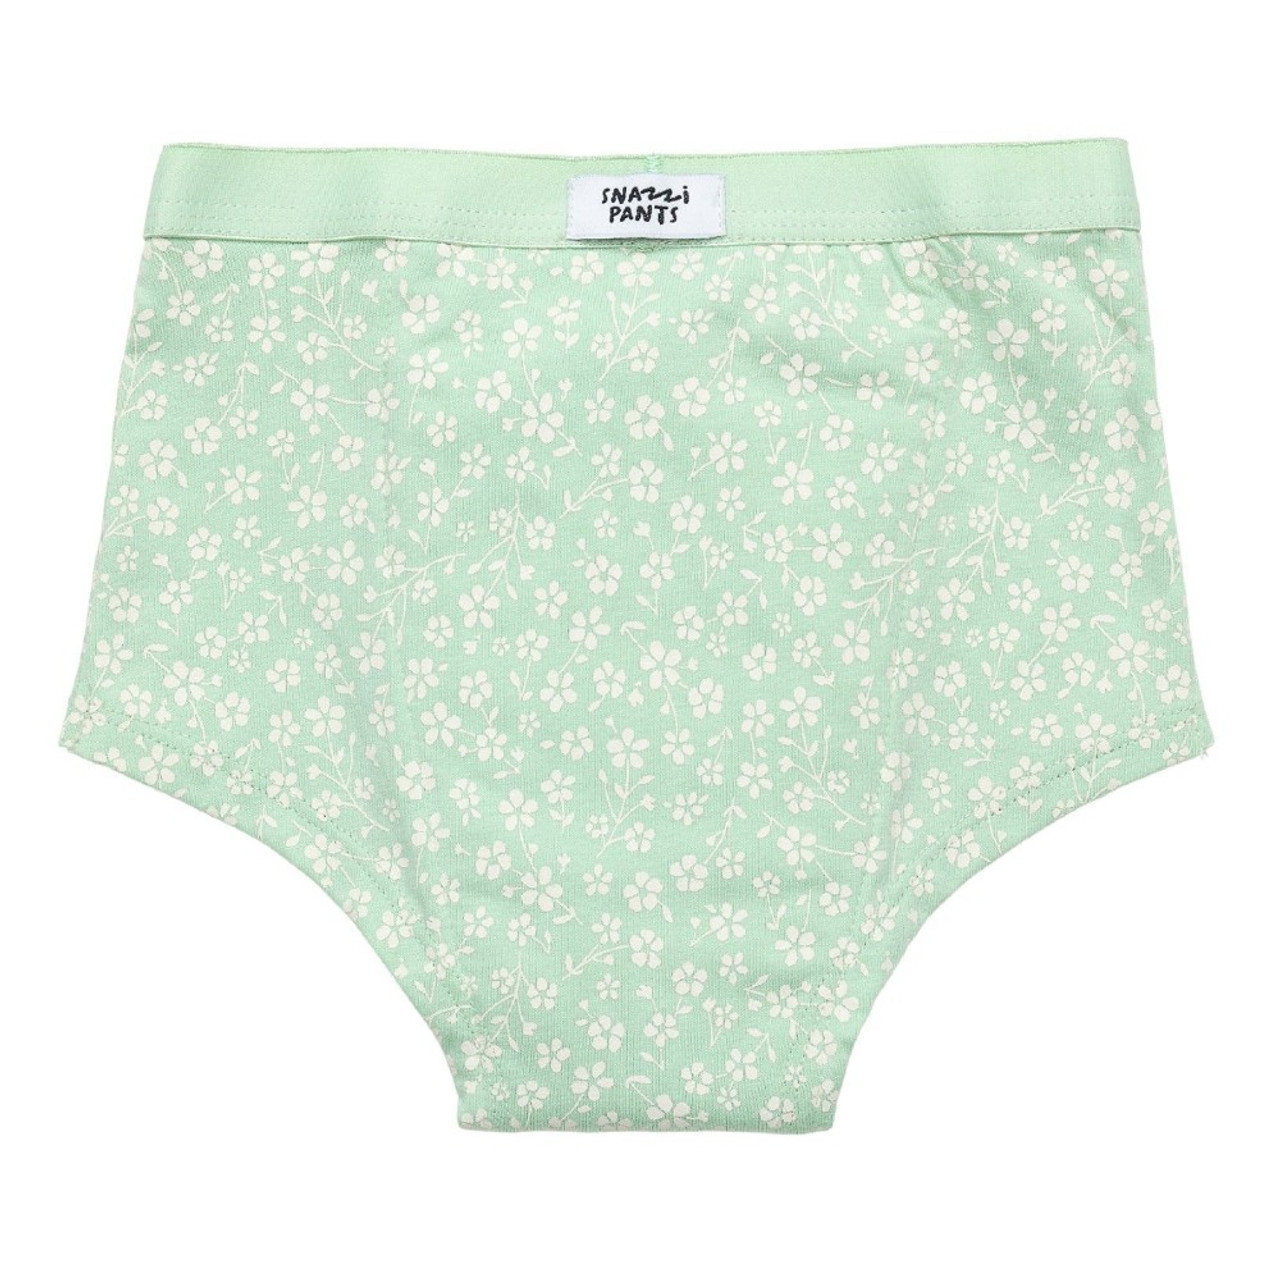 Organic Cotton Toilet Training Undies  Snazzi Pants Day Trainers – Brolly  Sheets AU